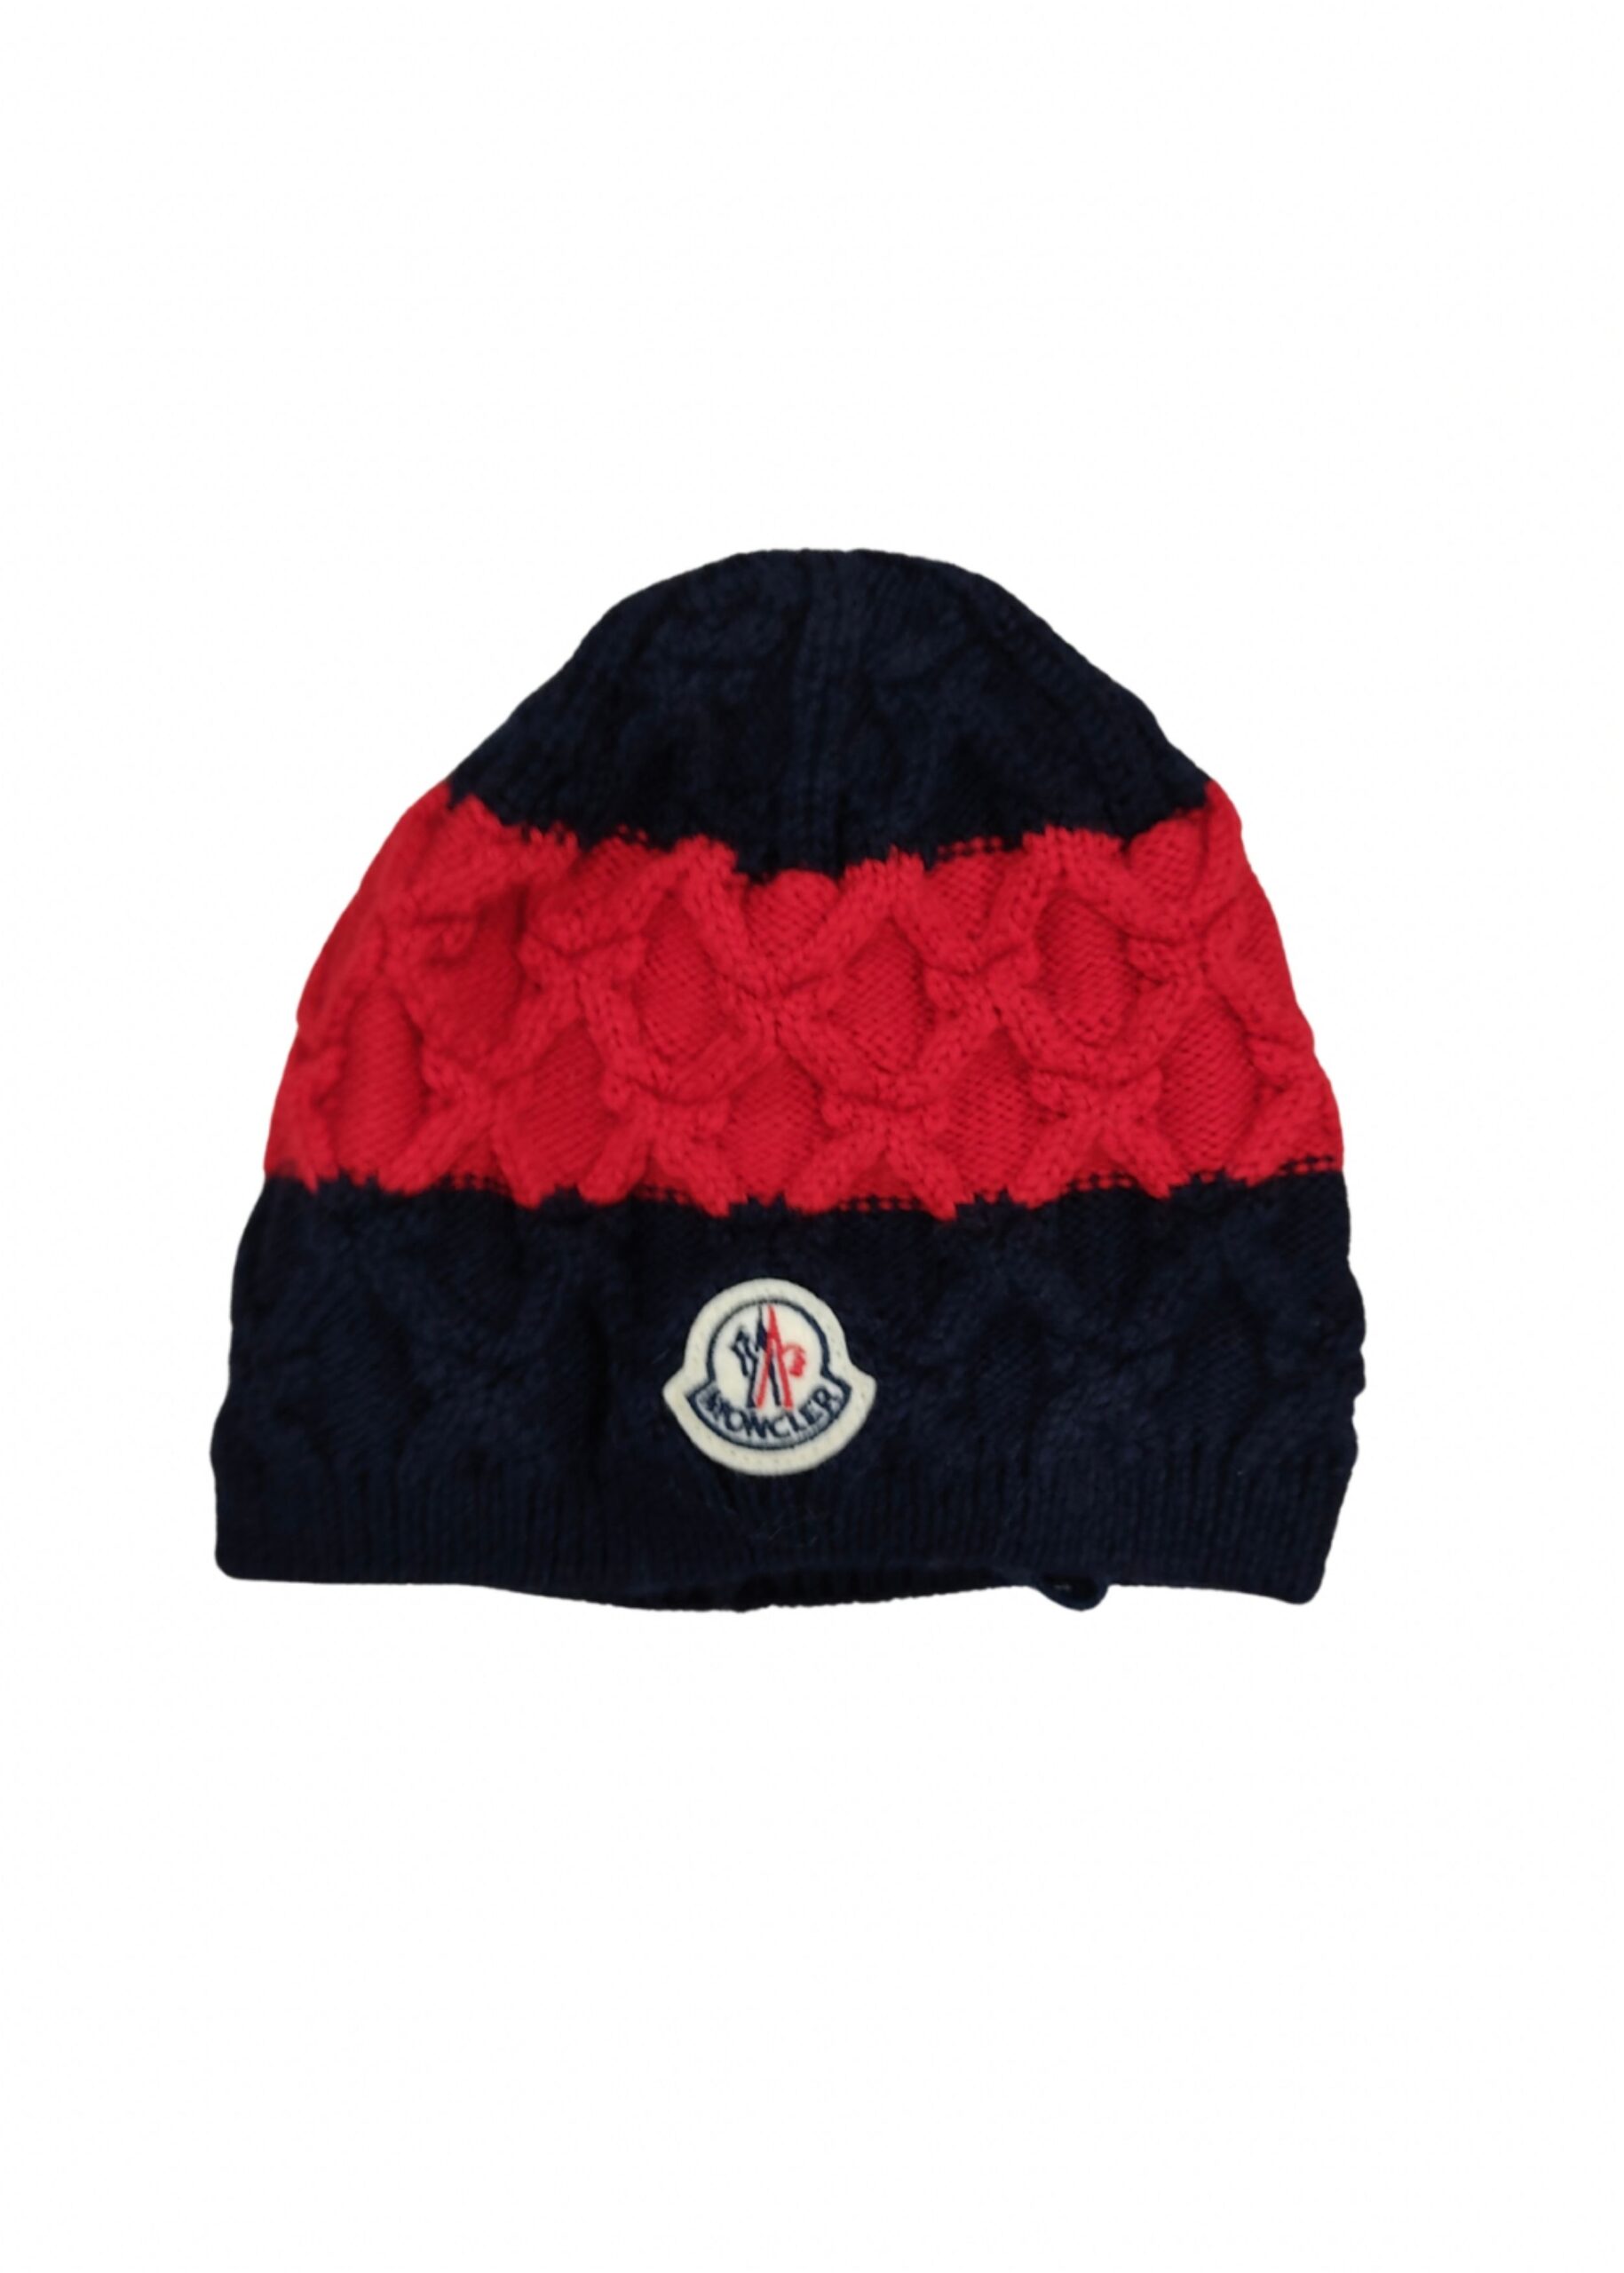 Featured image for “MONCLER BERRETTO LANA BLU-ROSSO”